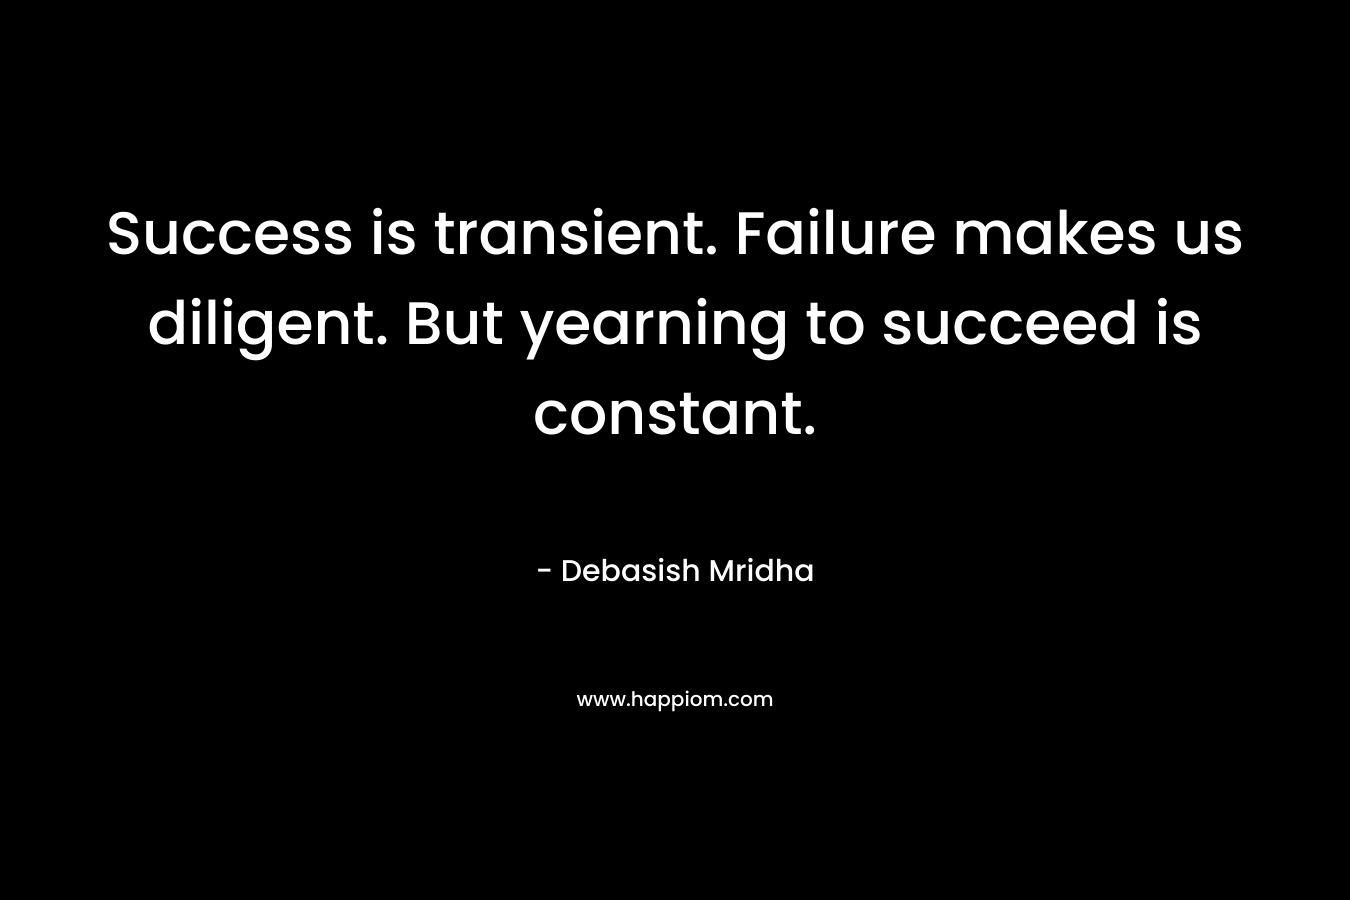 Success is transient. Failure makes us diligent. But yearning to succeed is constant. – Debasish Mridha